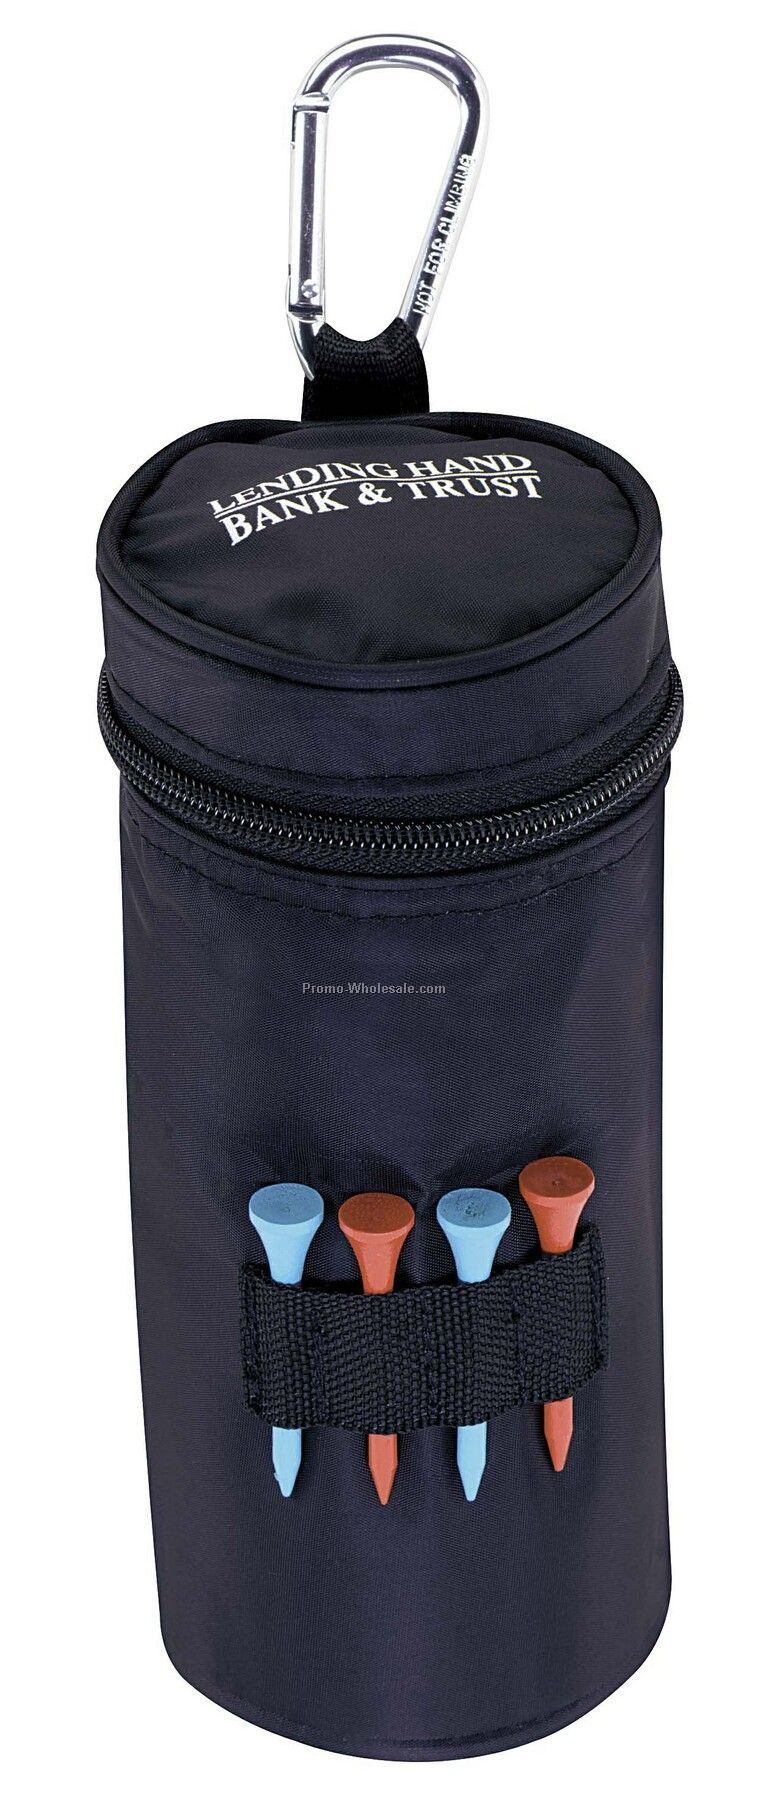 Tee Off Water Bottle Cooler W/Tees (3 Day Service)